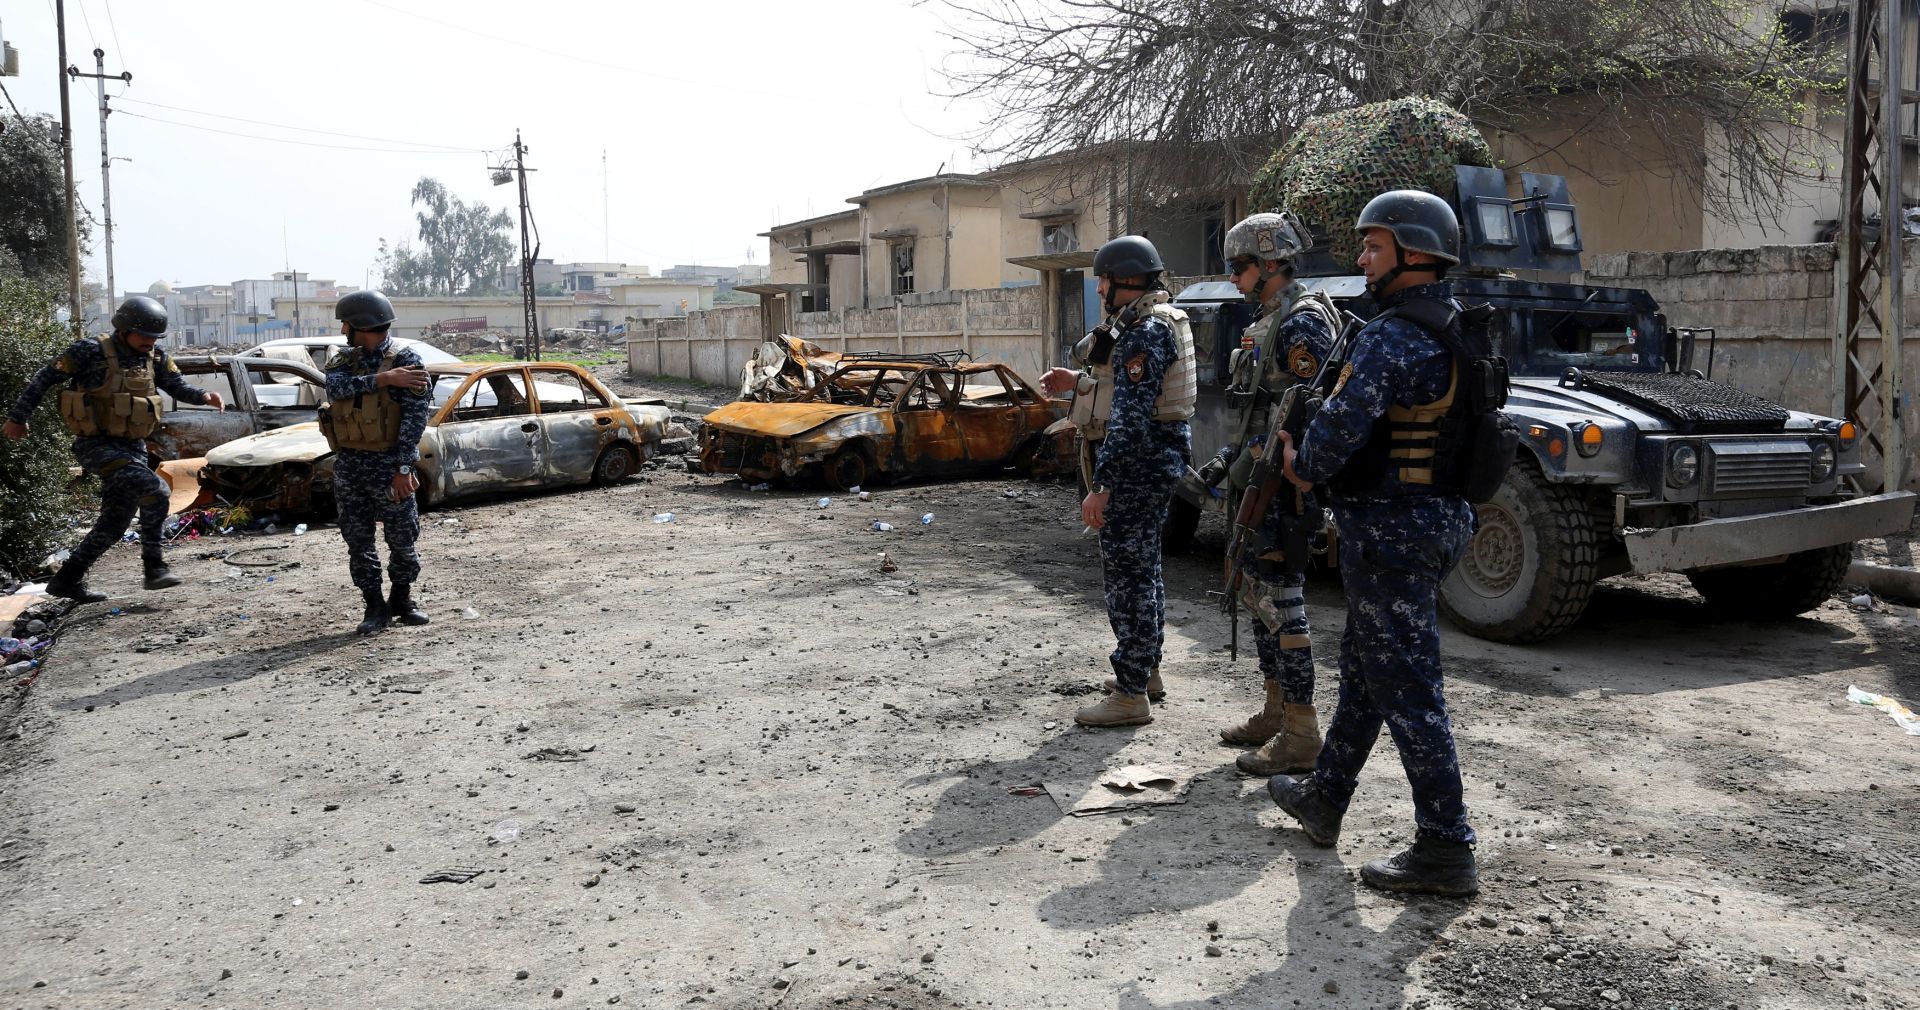 epa05860387 Iraqi police forces take up position at the recently recaptured district of Dawasa in west of Mosul, Iraq on 20 March 2017. Iraqi forces backed by airstrikes from a US-led coalition recaptured many disricts in western Mosul, and the fighting has reached into the Old City and around the Mosul's al-Nuri Mosque, where the Islamic State (IS) group leader Abu Bakr al-Baghdadi had declared his 'caliphate' in his only known public appearance in 2014.  EPA/AHMED JALIL